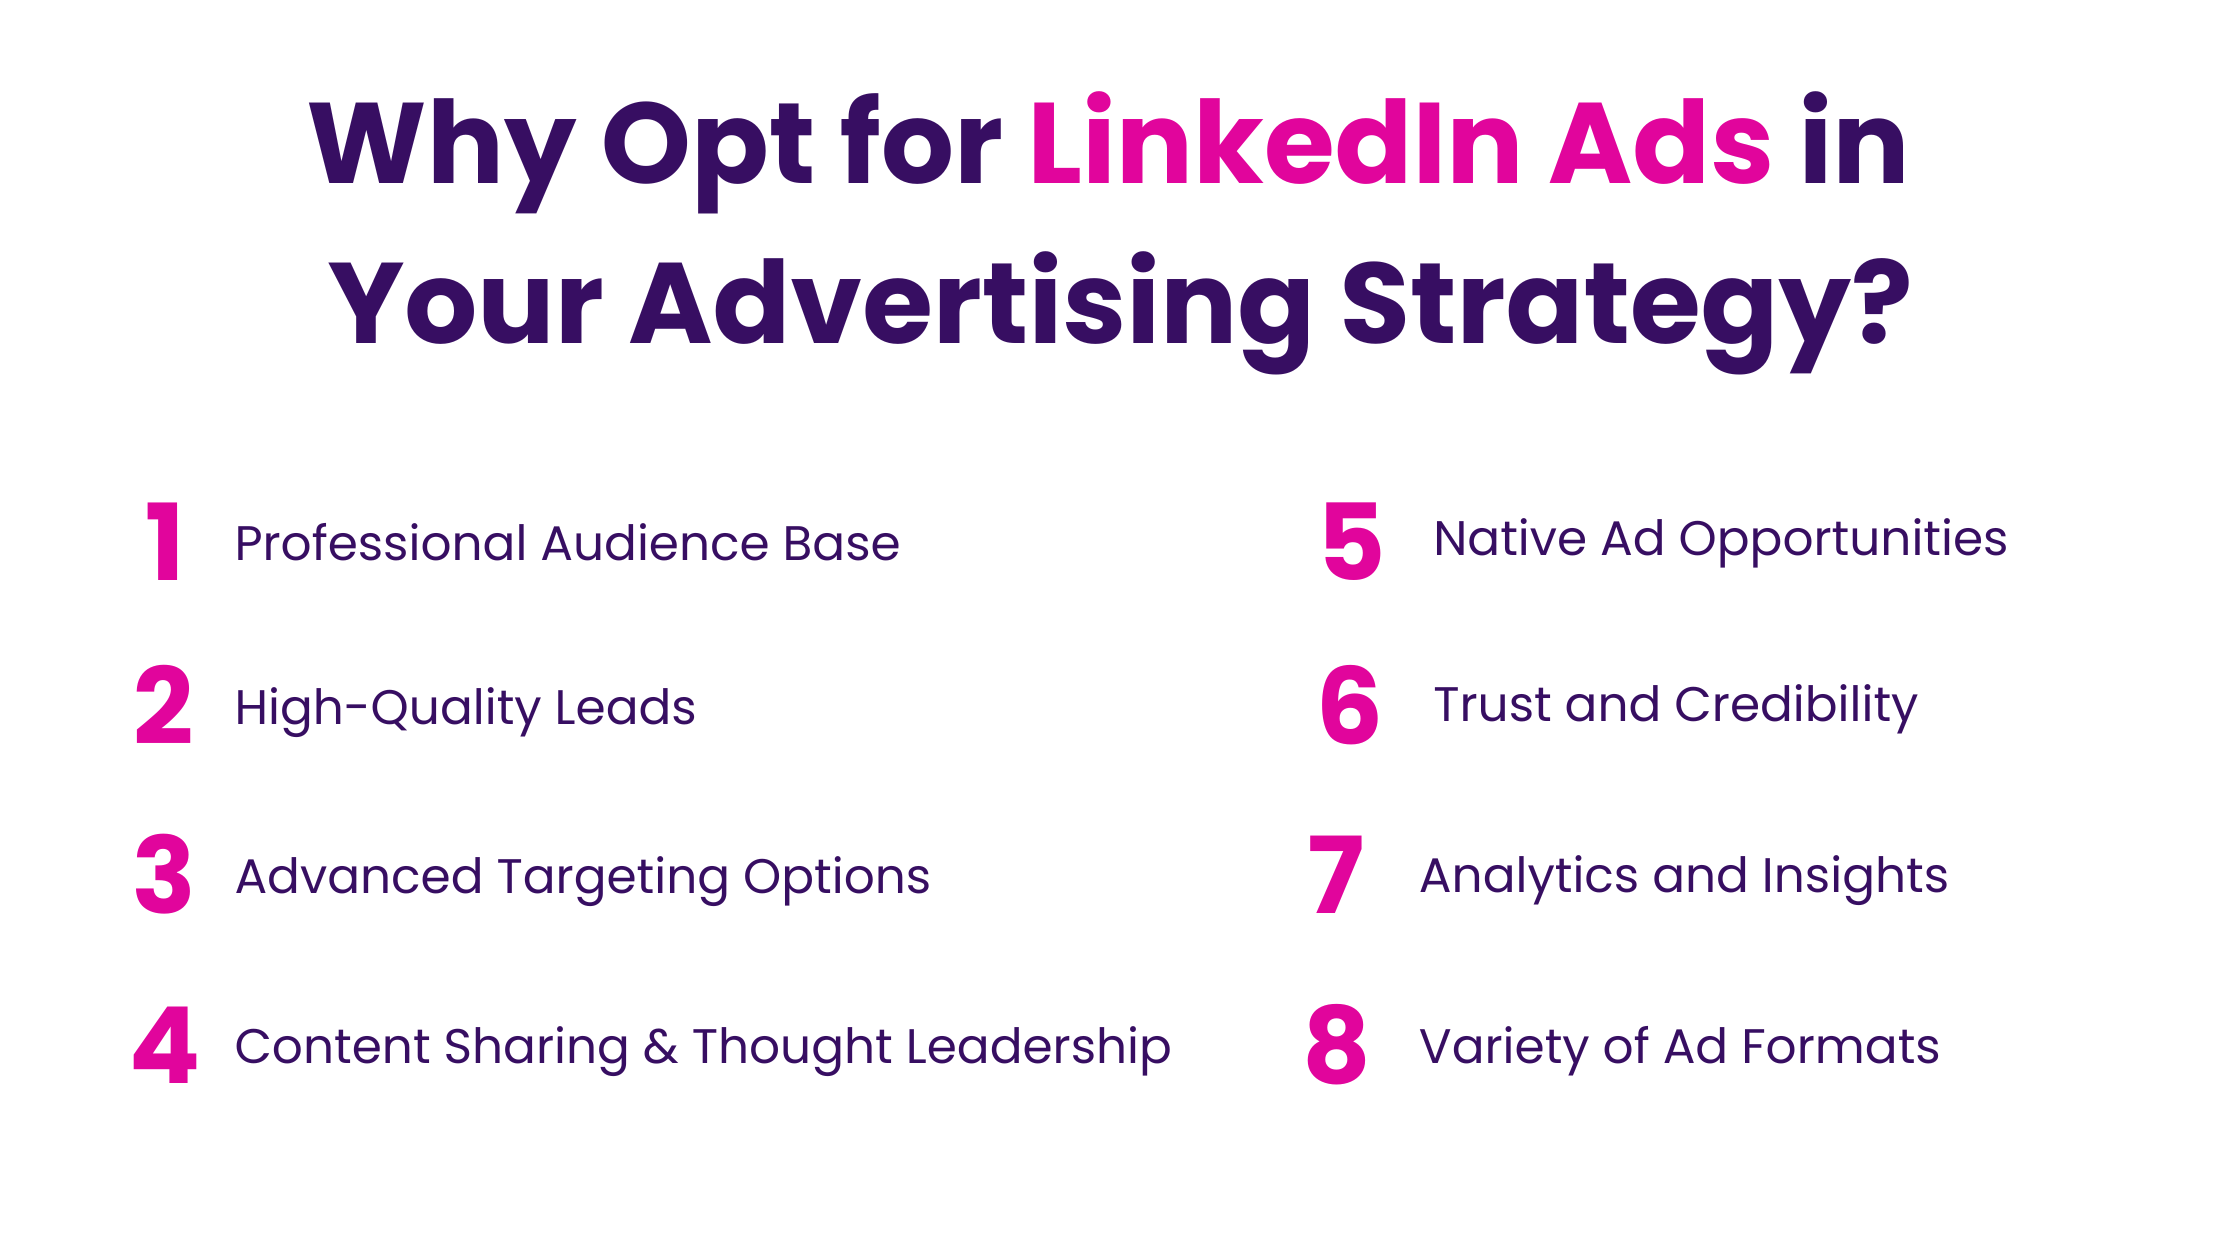 Why Opt for LinkedIn Ads in Your Advertising Strategy